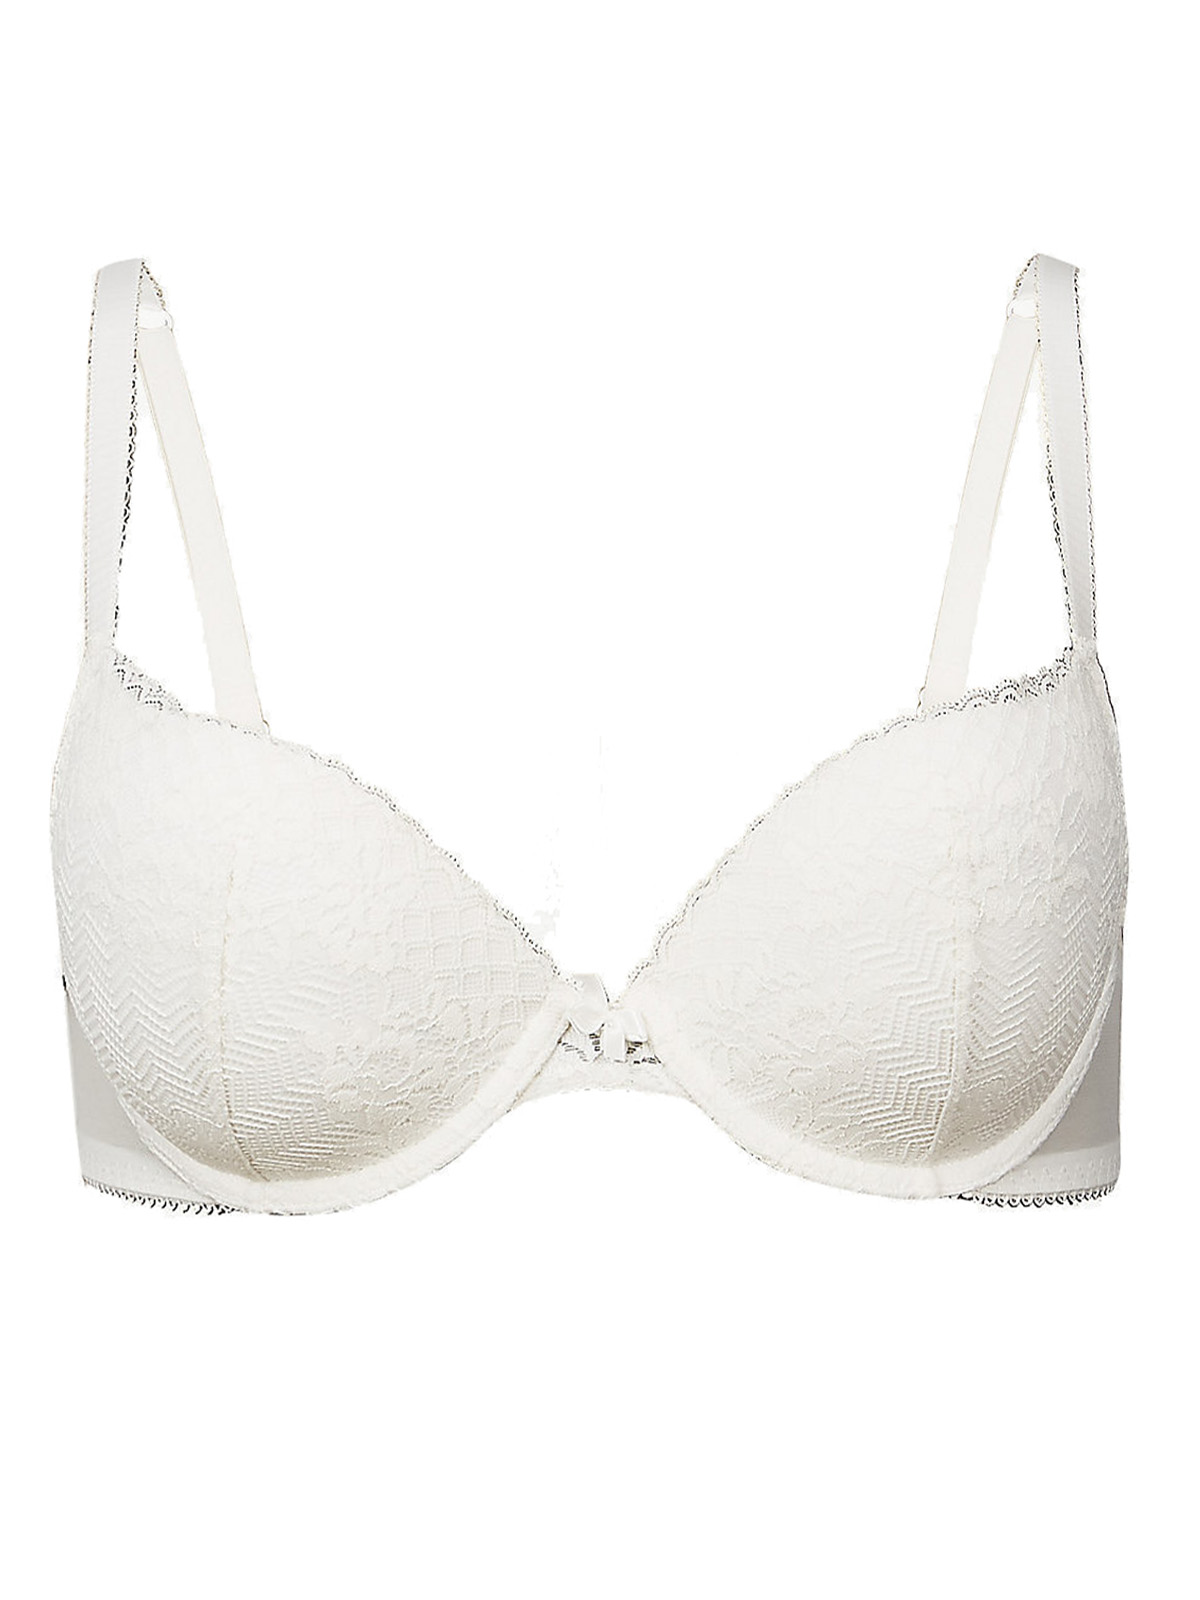 Marks and Spencer - - M&5 ASSORTED Padded Bras - Size 32 to 38 (B-C-D-DD)